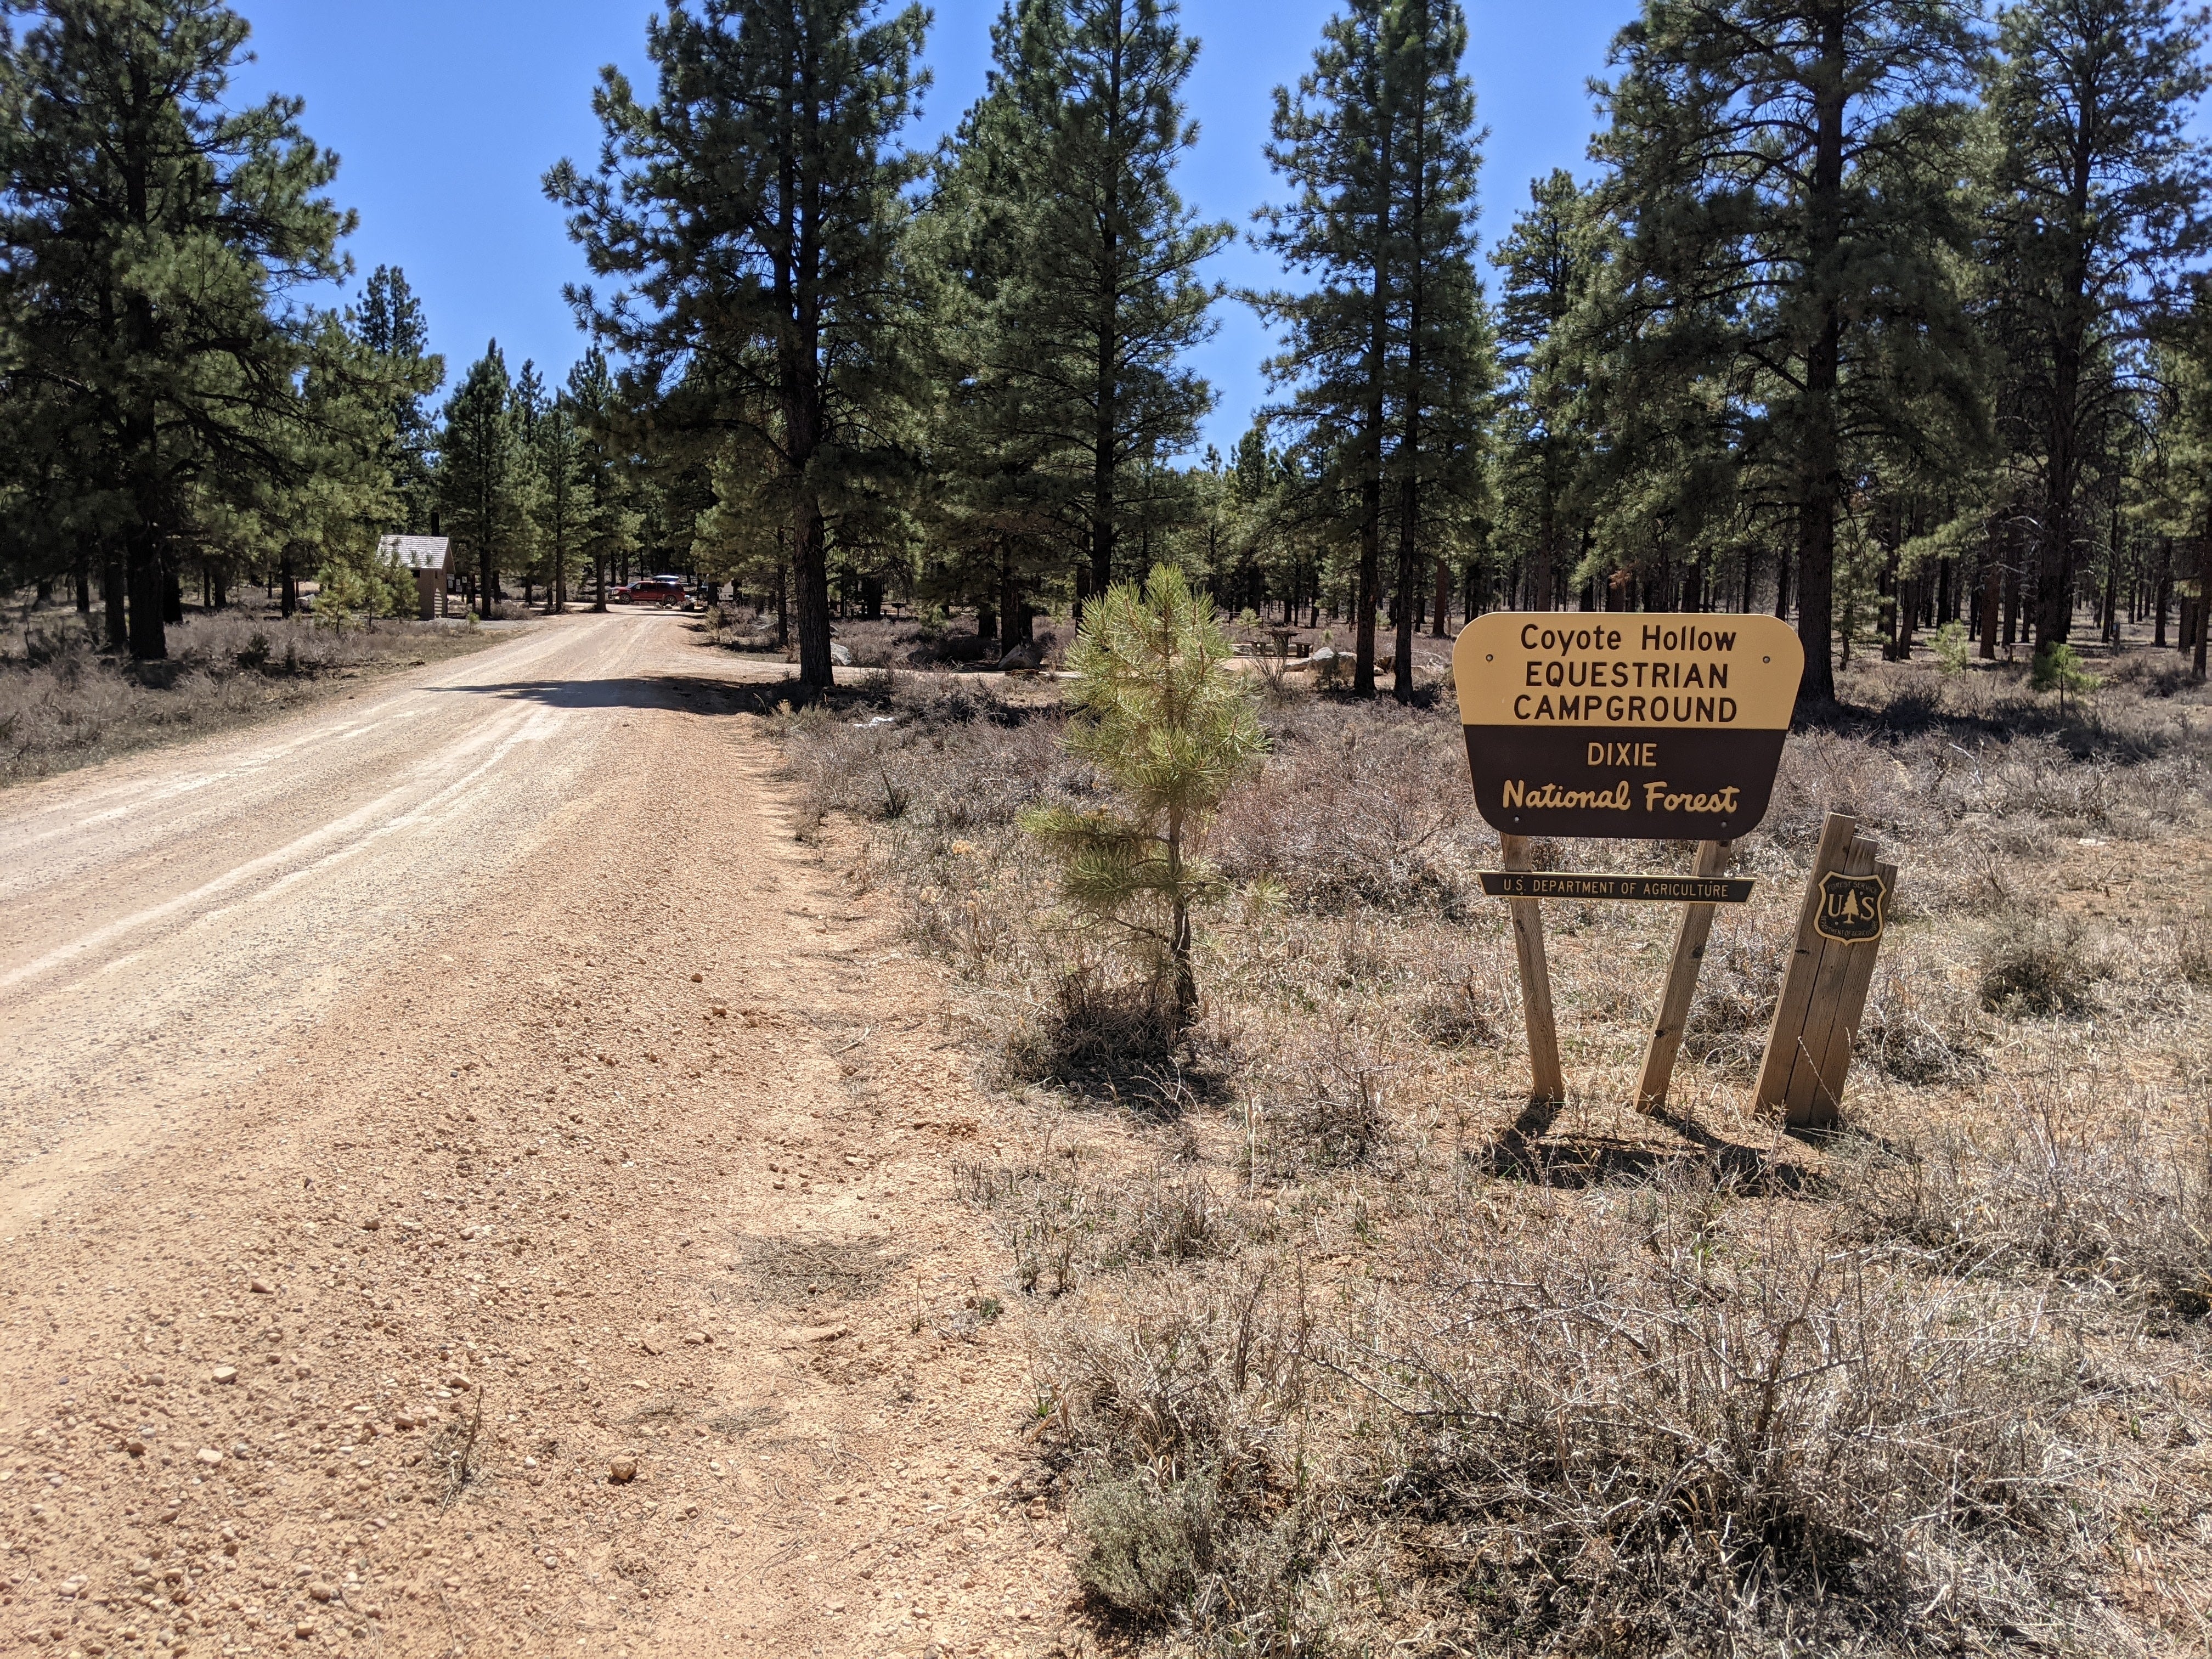 Camper submitted image from Coyote Hollow Equestrian Campground - 1